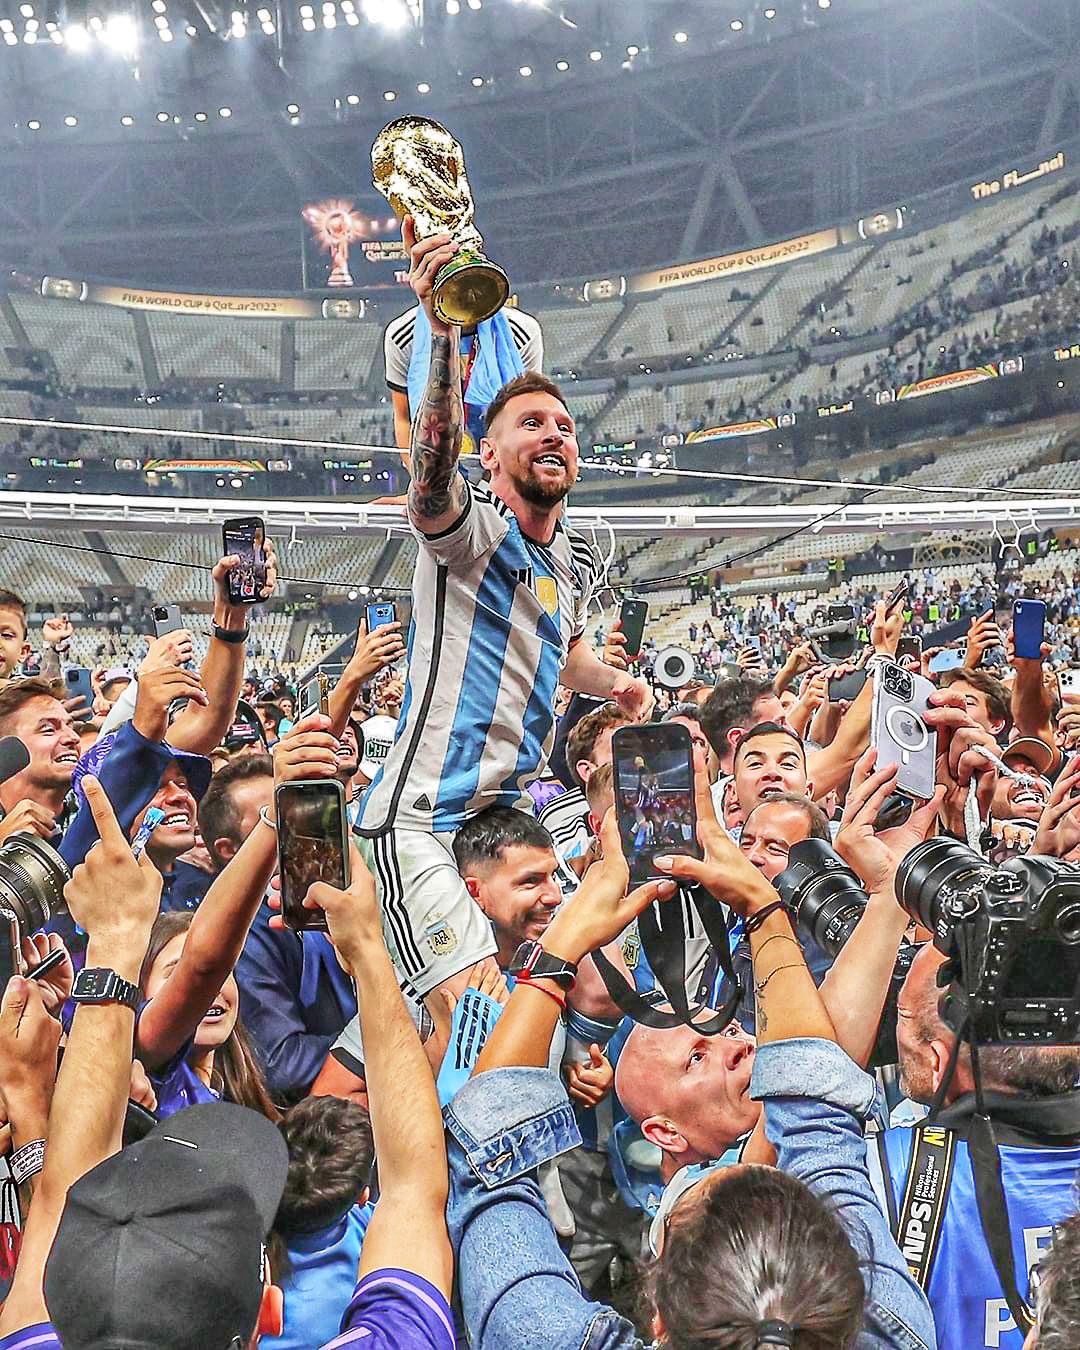 Argentina FIFA World Cup 2022 Champion wallpapers